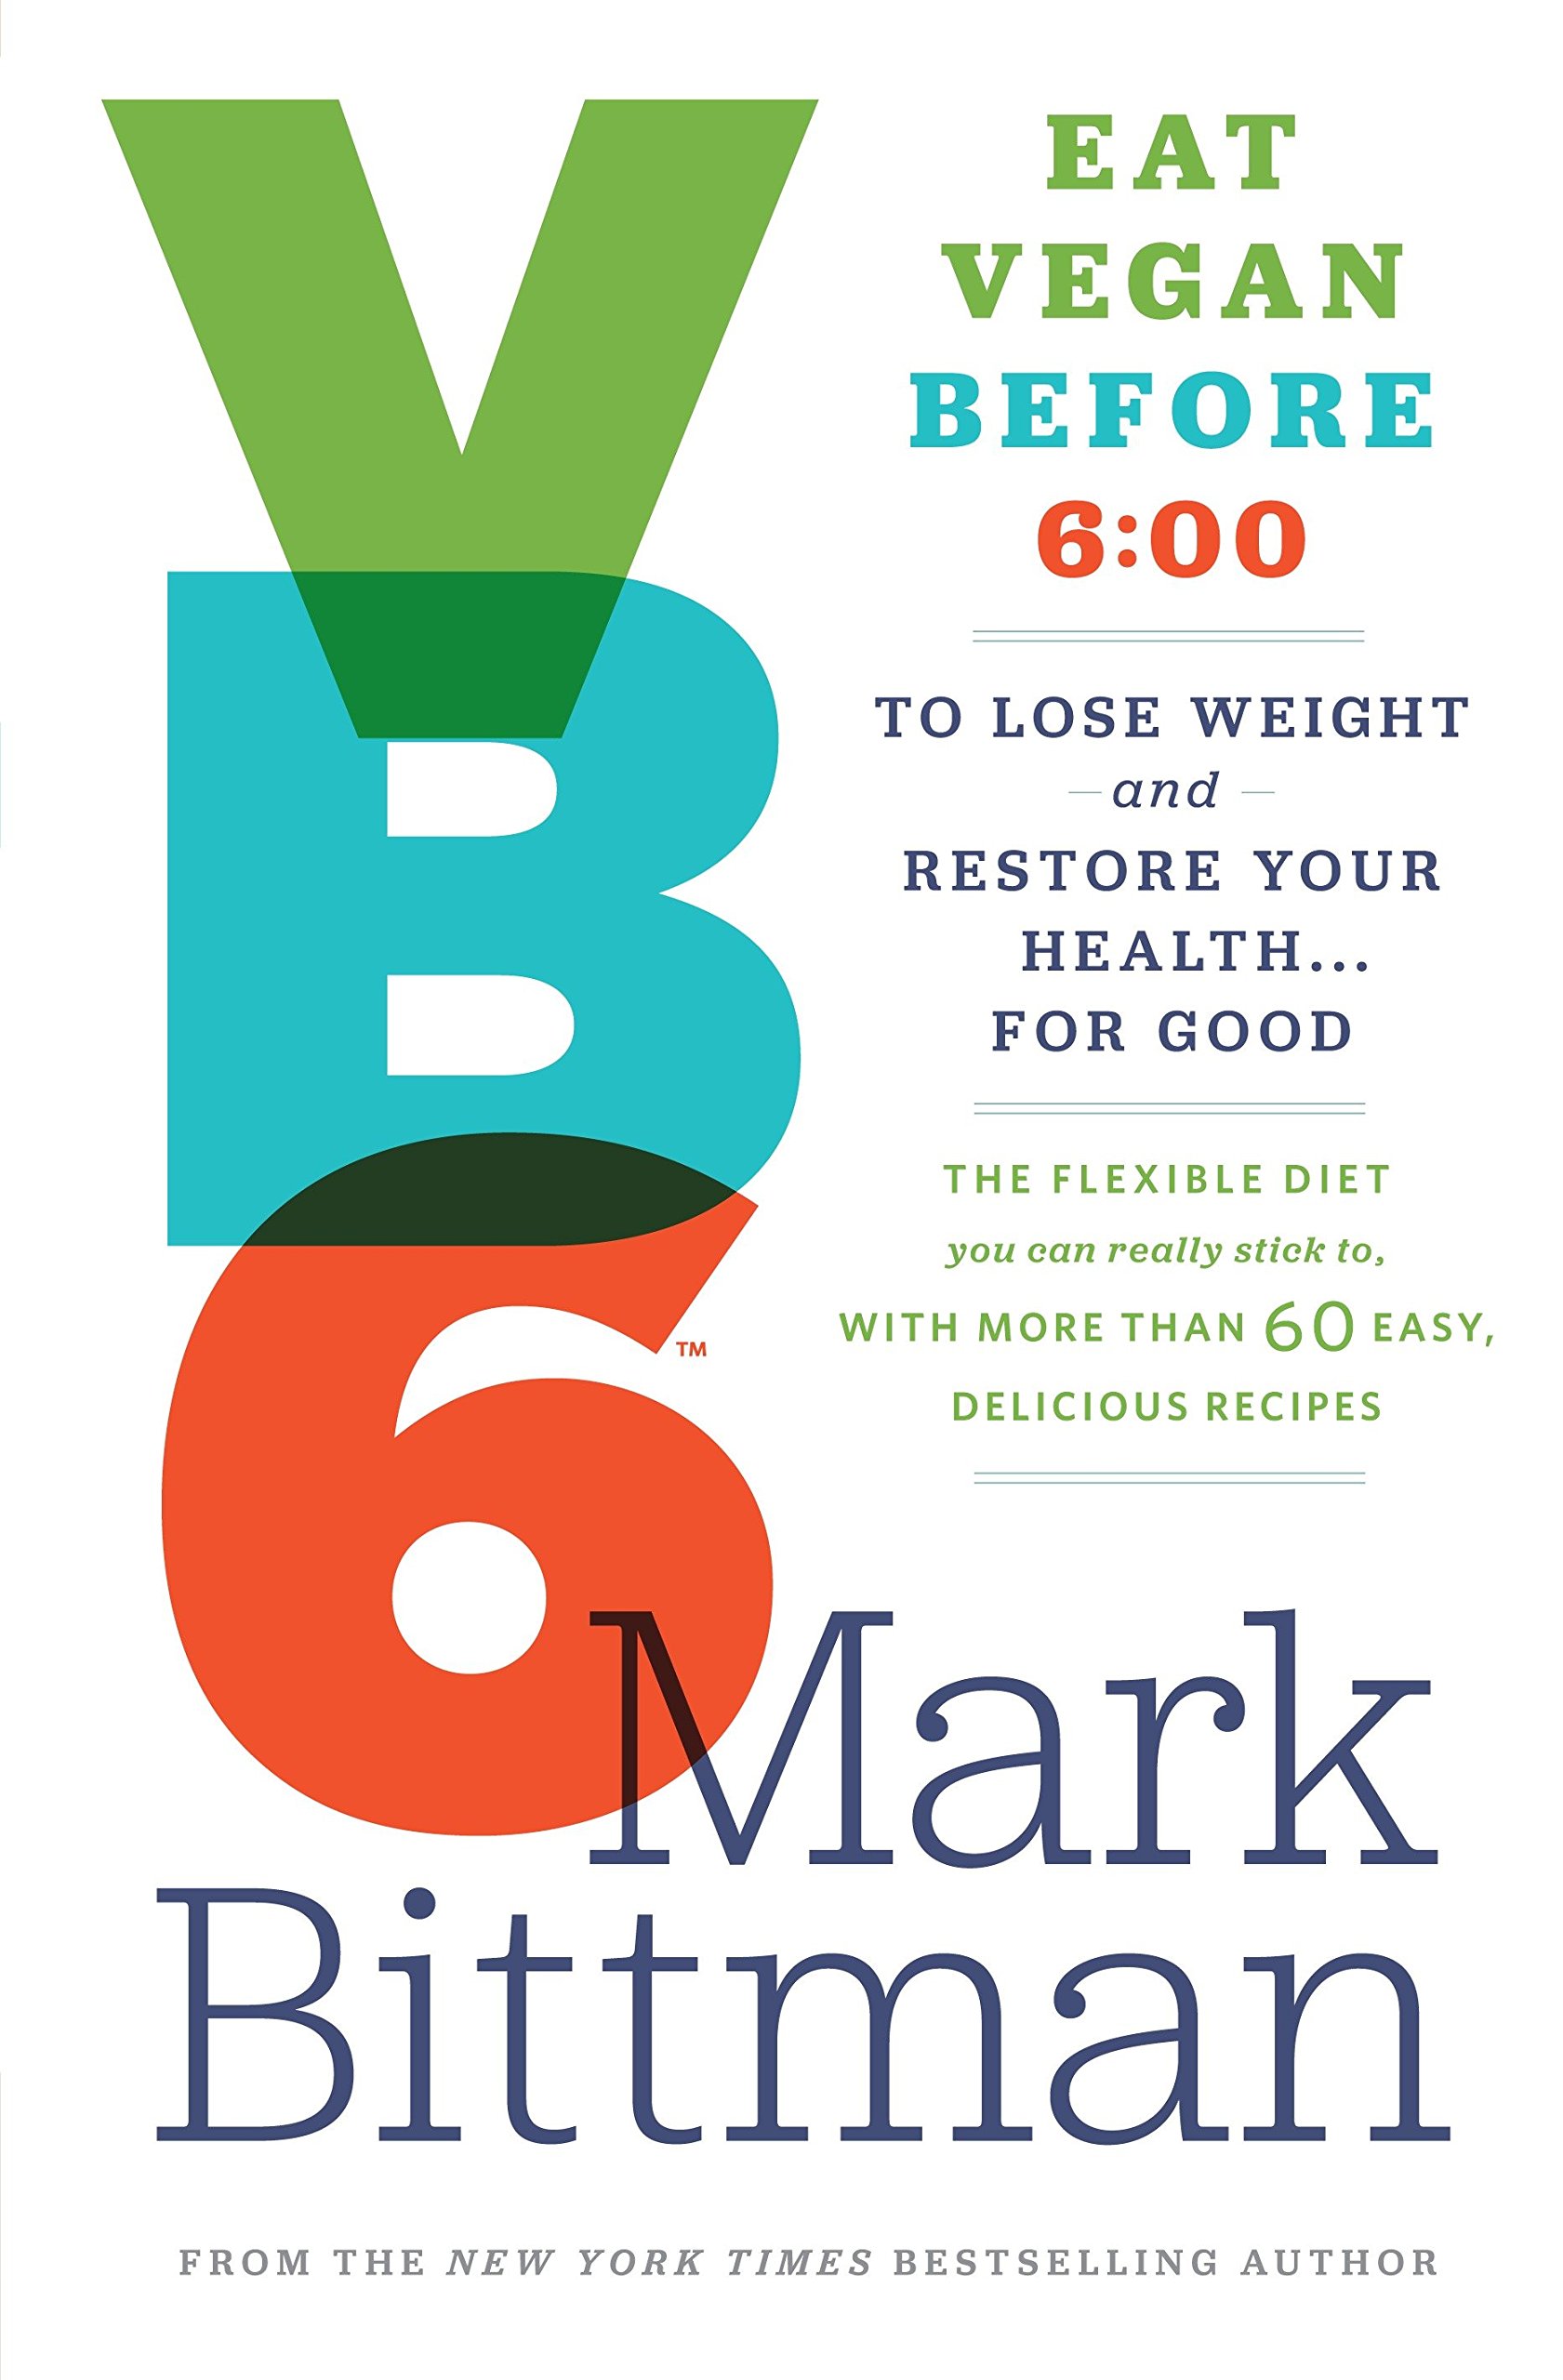 VB6 by Mark Bittman is a flexible diet plan that recommends eating a vegan diet before 6:00 p.m.